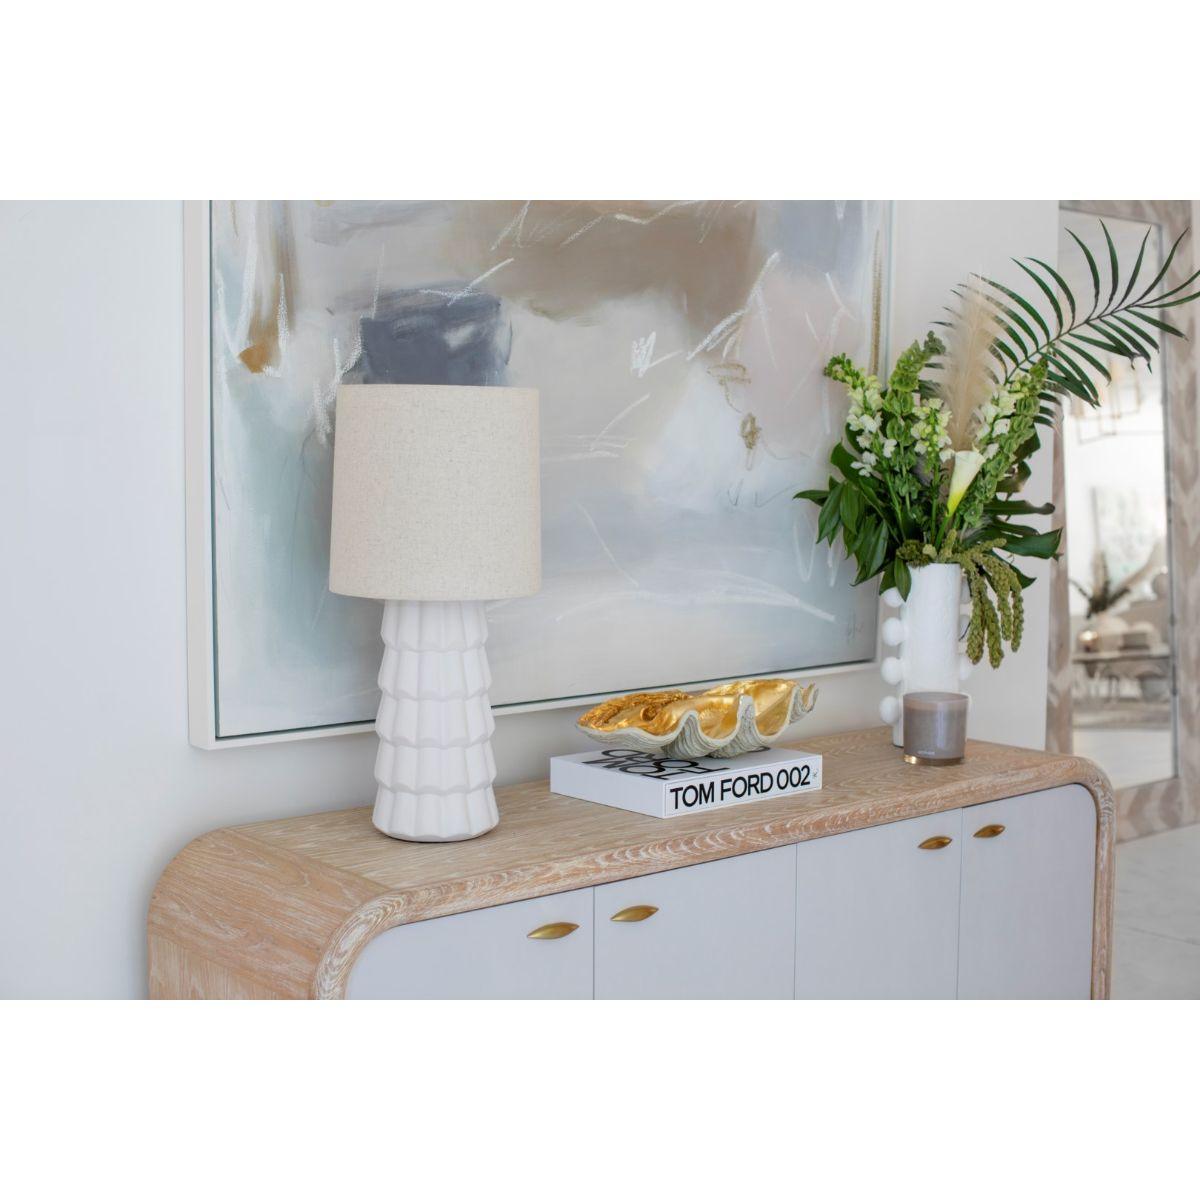 Maisie Table Lamp Ceramic Rough Texture White with Aged Brass Accents